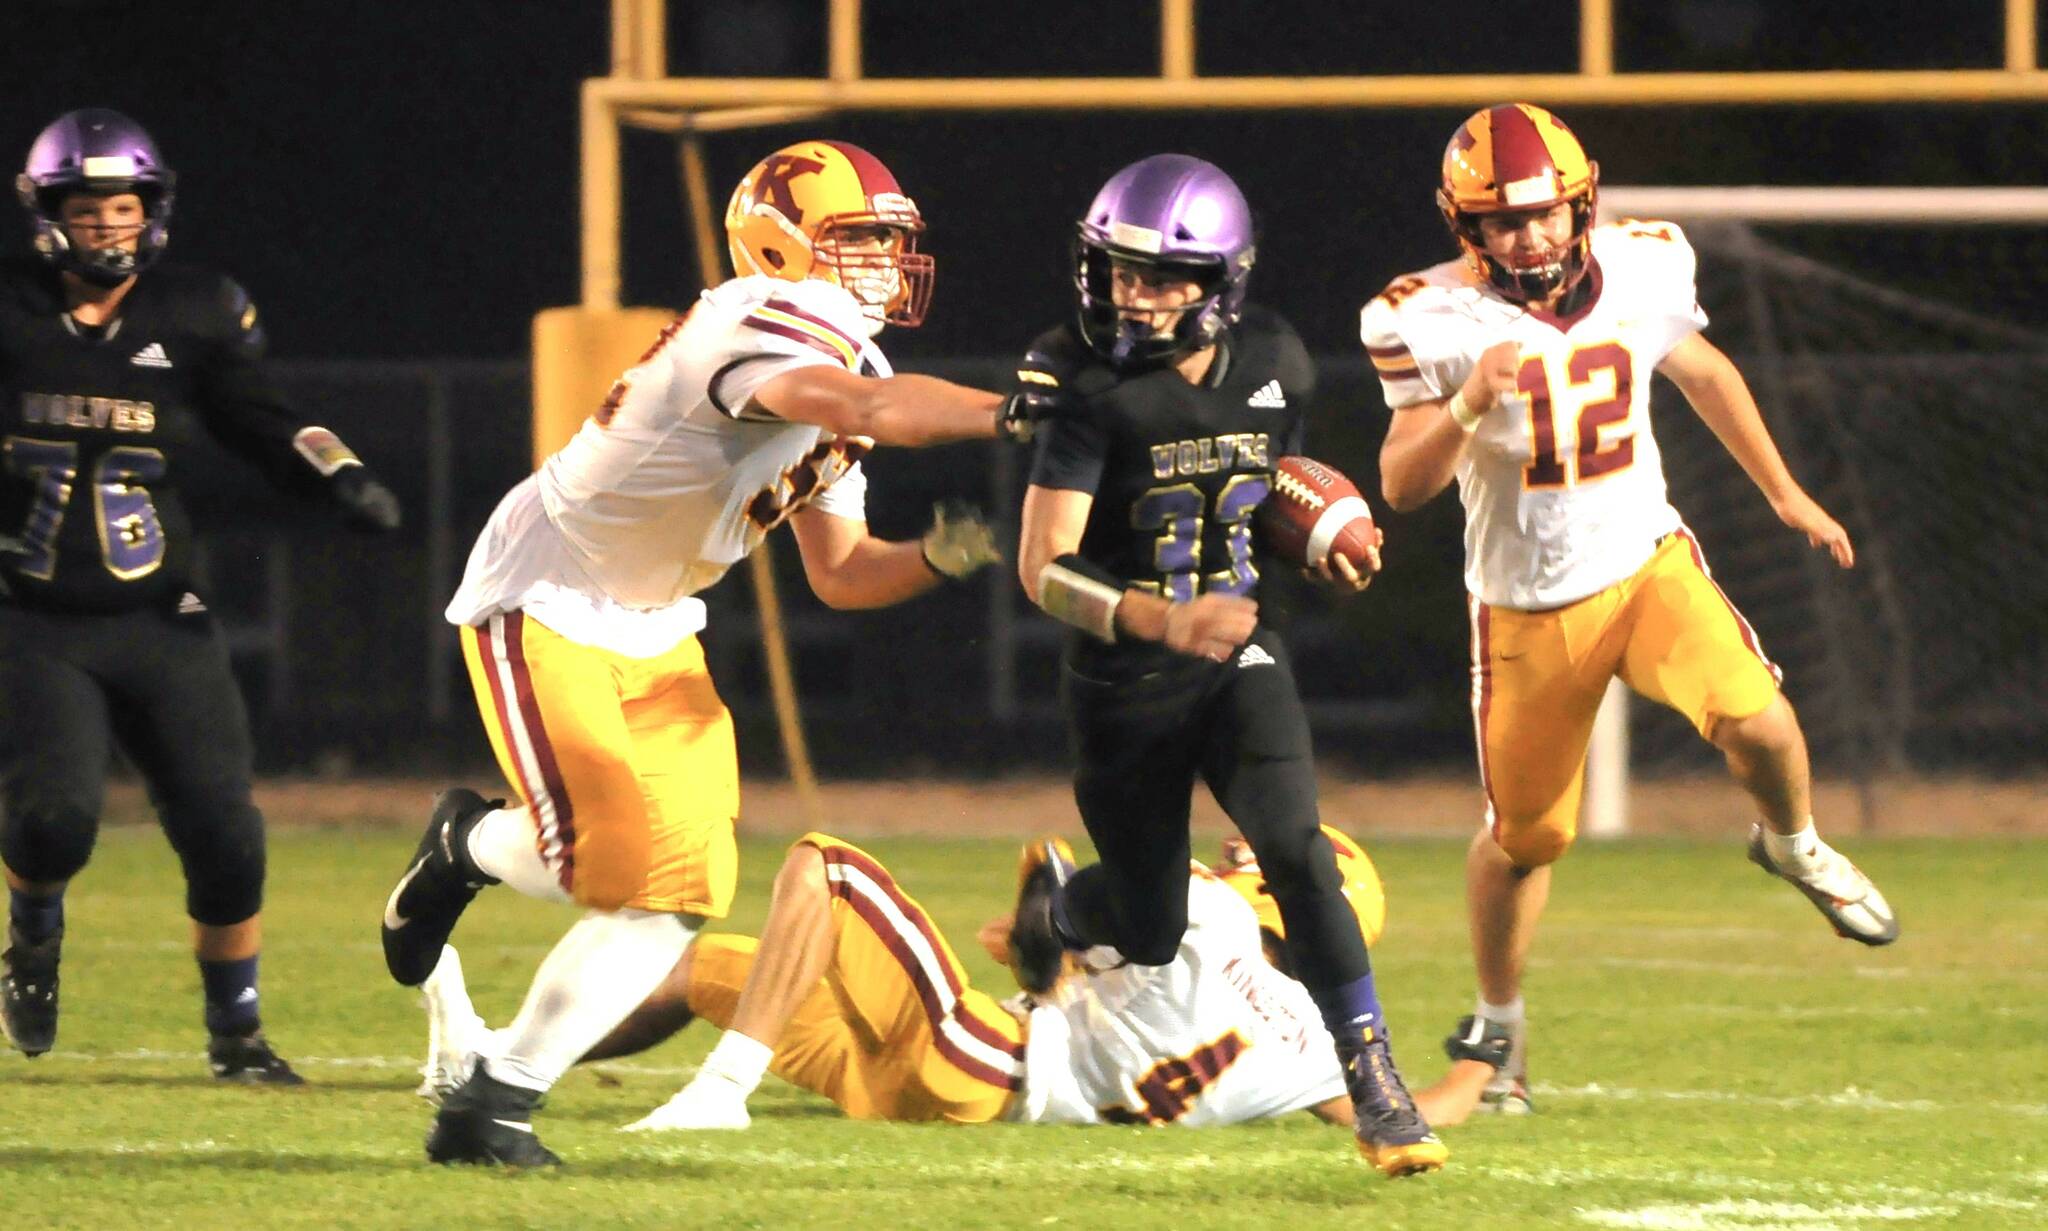 Sequim’s Sam Fitzgerald runs the ball during the Wolves’ 27-14 win over Kingston on Friday night. (Michael Dashiell/Olympic Peninsula News Group)